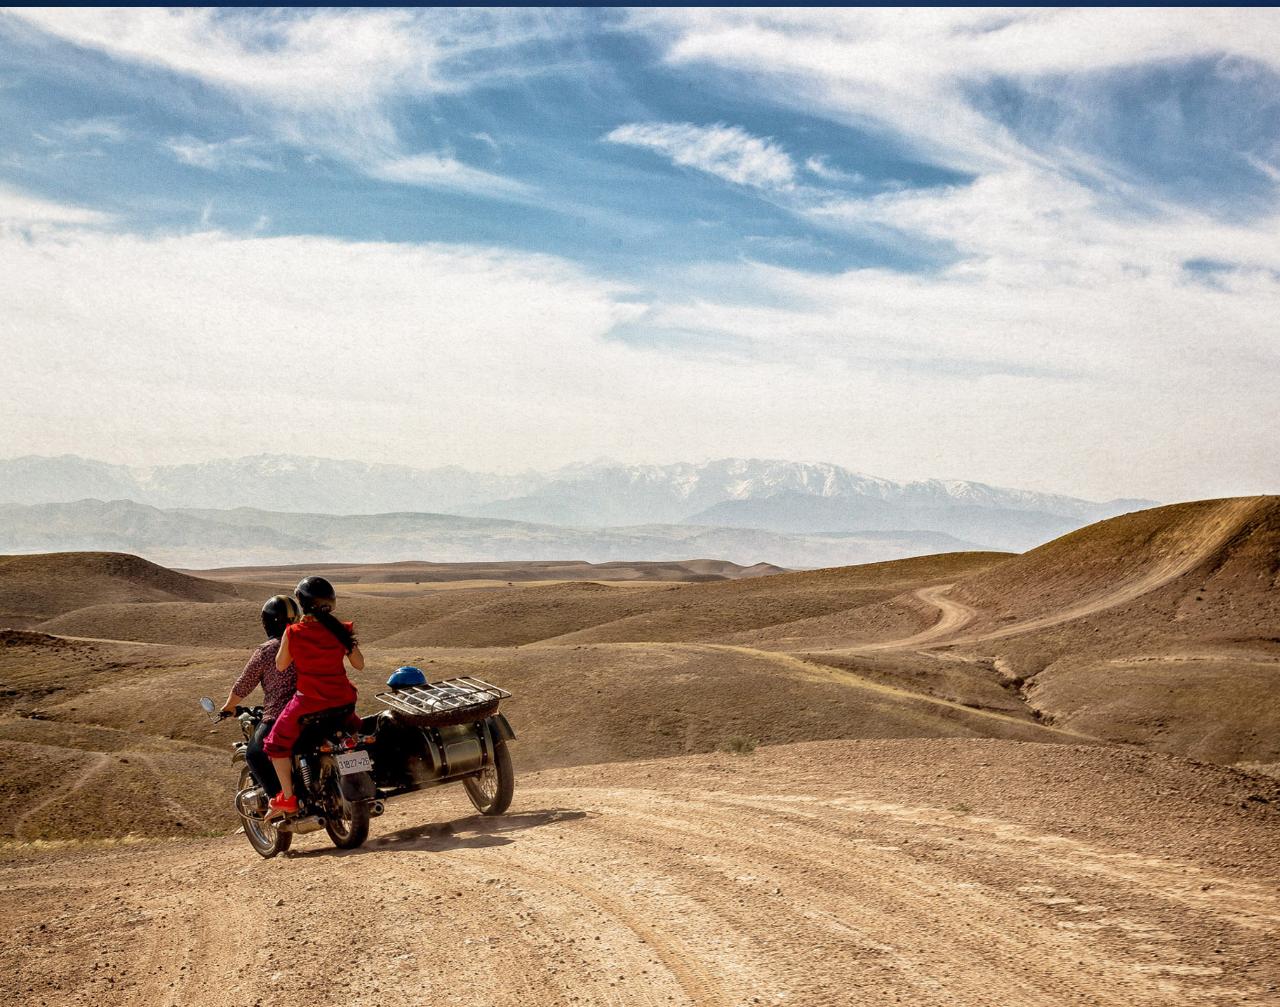 - The Desert Ride - 6h (Price is per sidecar)